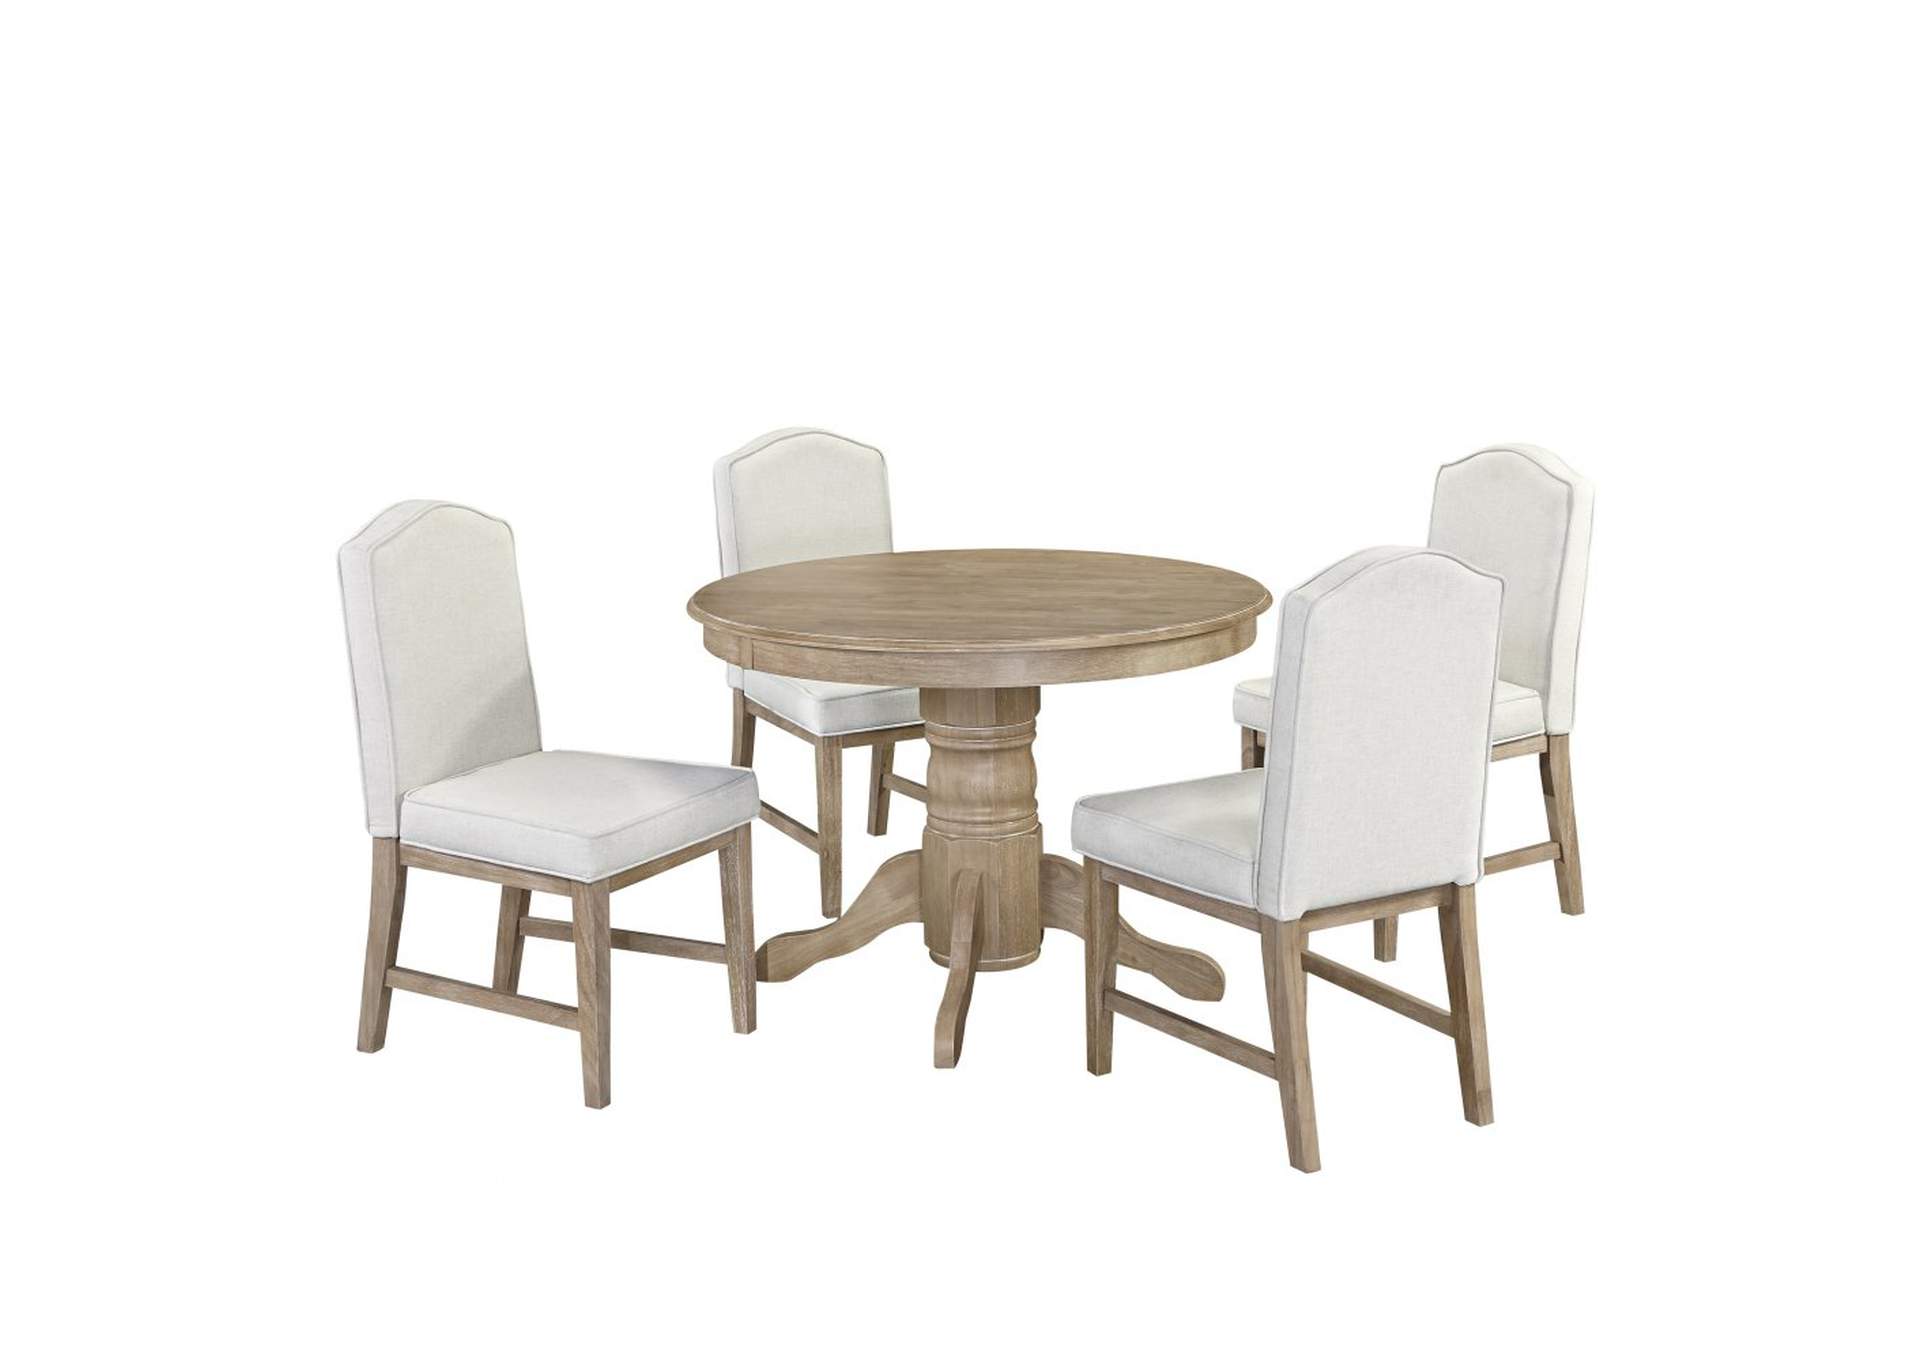 Claire Off-White 5 Piece Dining Set,Homestyles